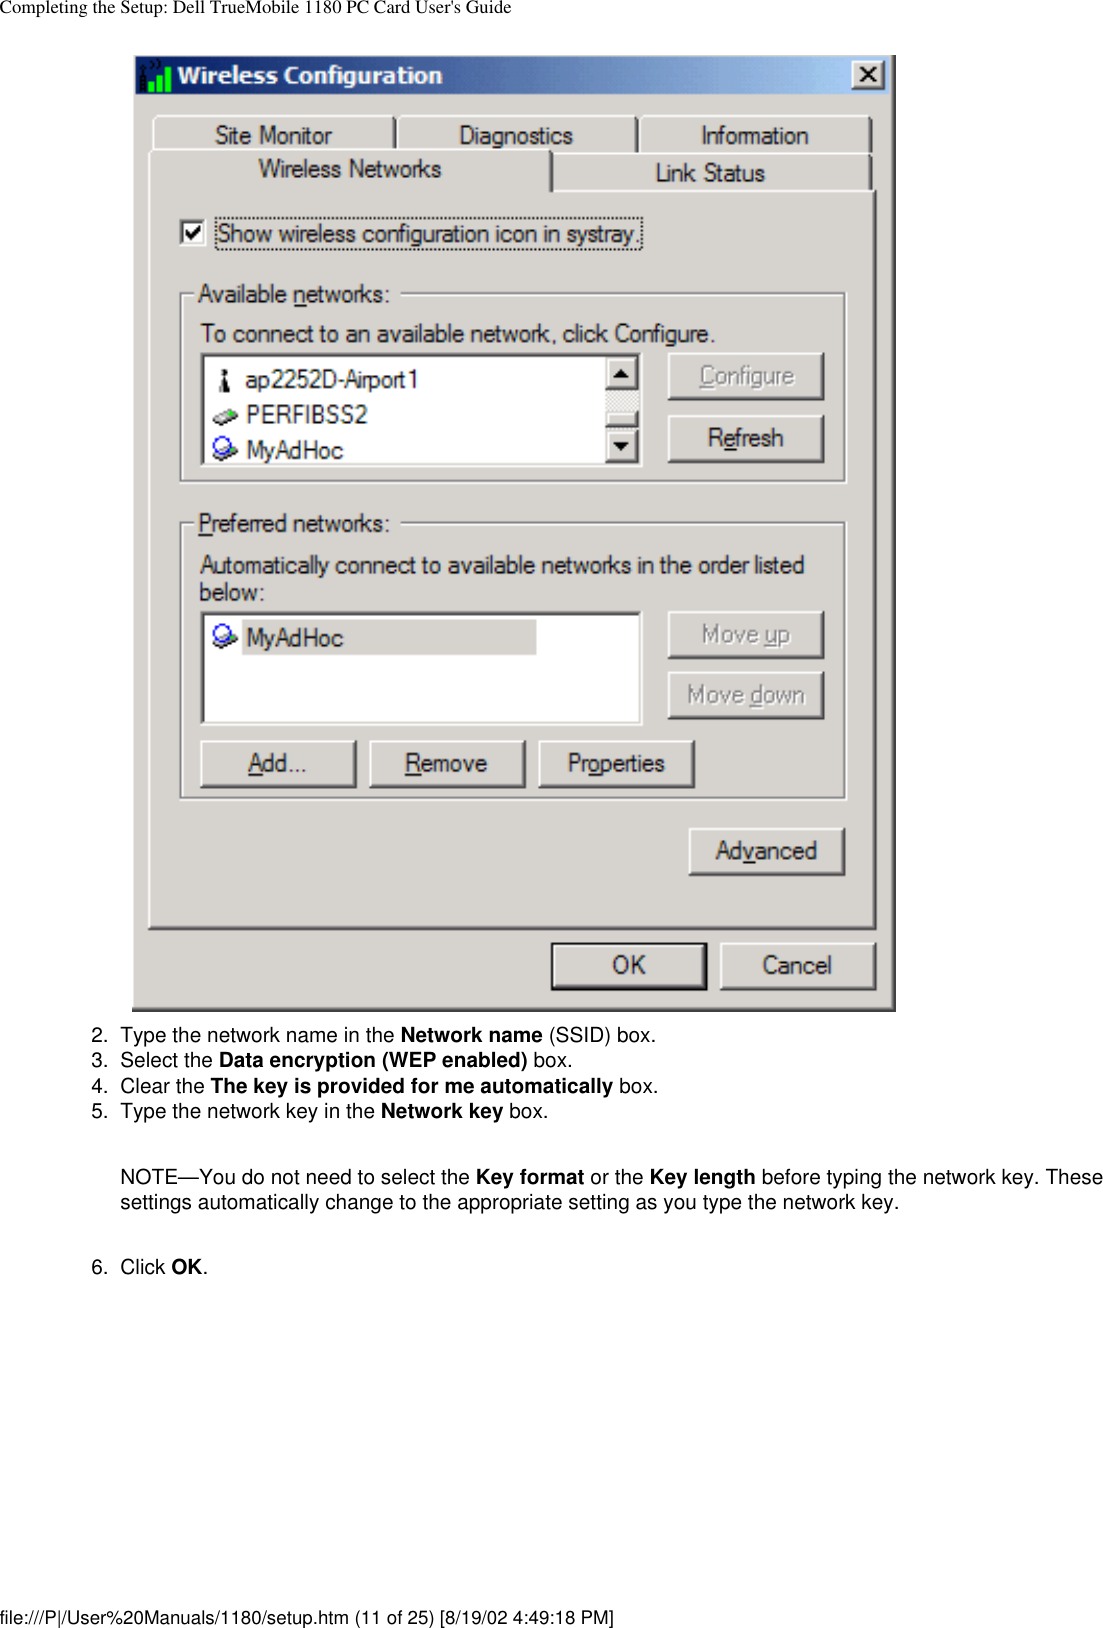 Completing the Setup: Dell TrueMobile 1180 PC Card User&apos;s Guide2.  Type the network name in the Network name (SSID) box.3.  Select the Data encryption (WEP enabled) box.4.  Clear the The key is provided for me automatically box.5.  Type the network key in the Network key box. NOTE—You do not need to select the Key format or the Key length before typing the network key. These settings automatically change to the appropriate setting as you type the network key.6.  Click OK. file:///P|/User%20Manuals/1180/setup.htm (11 of 25) [8/19/02 4:49:18 PM]